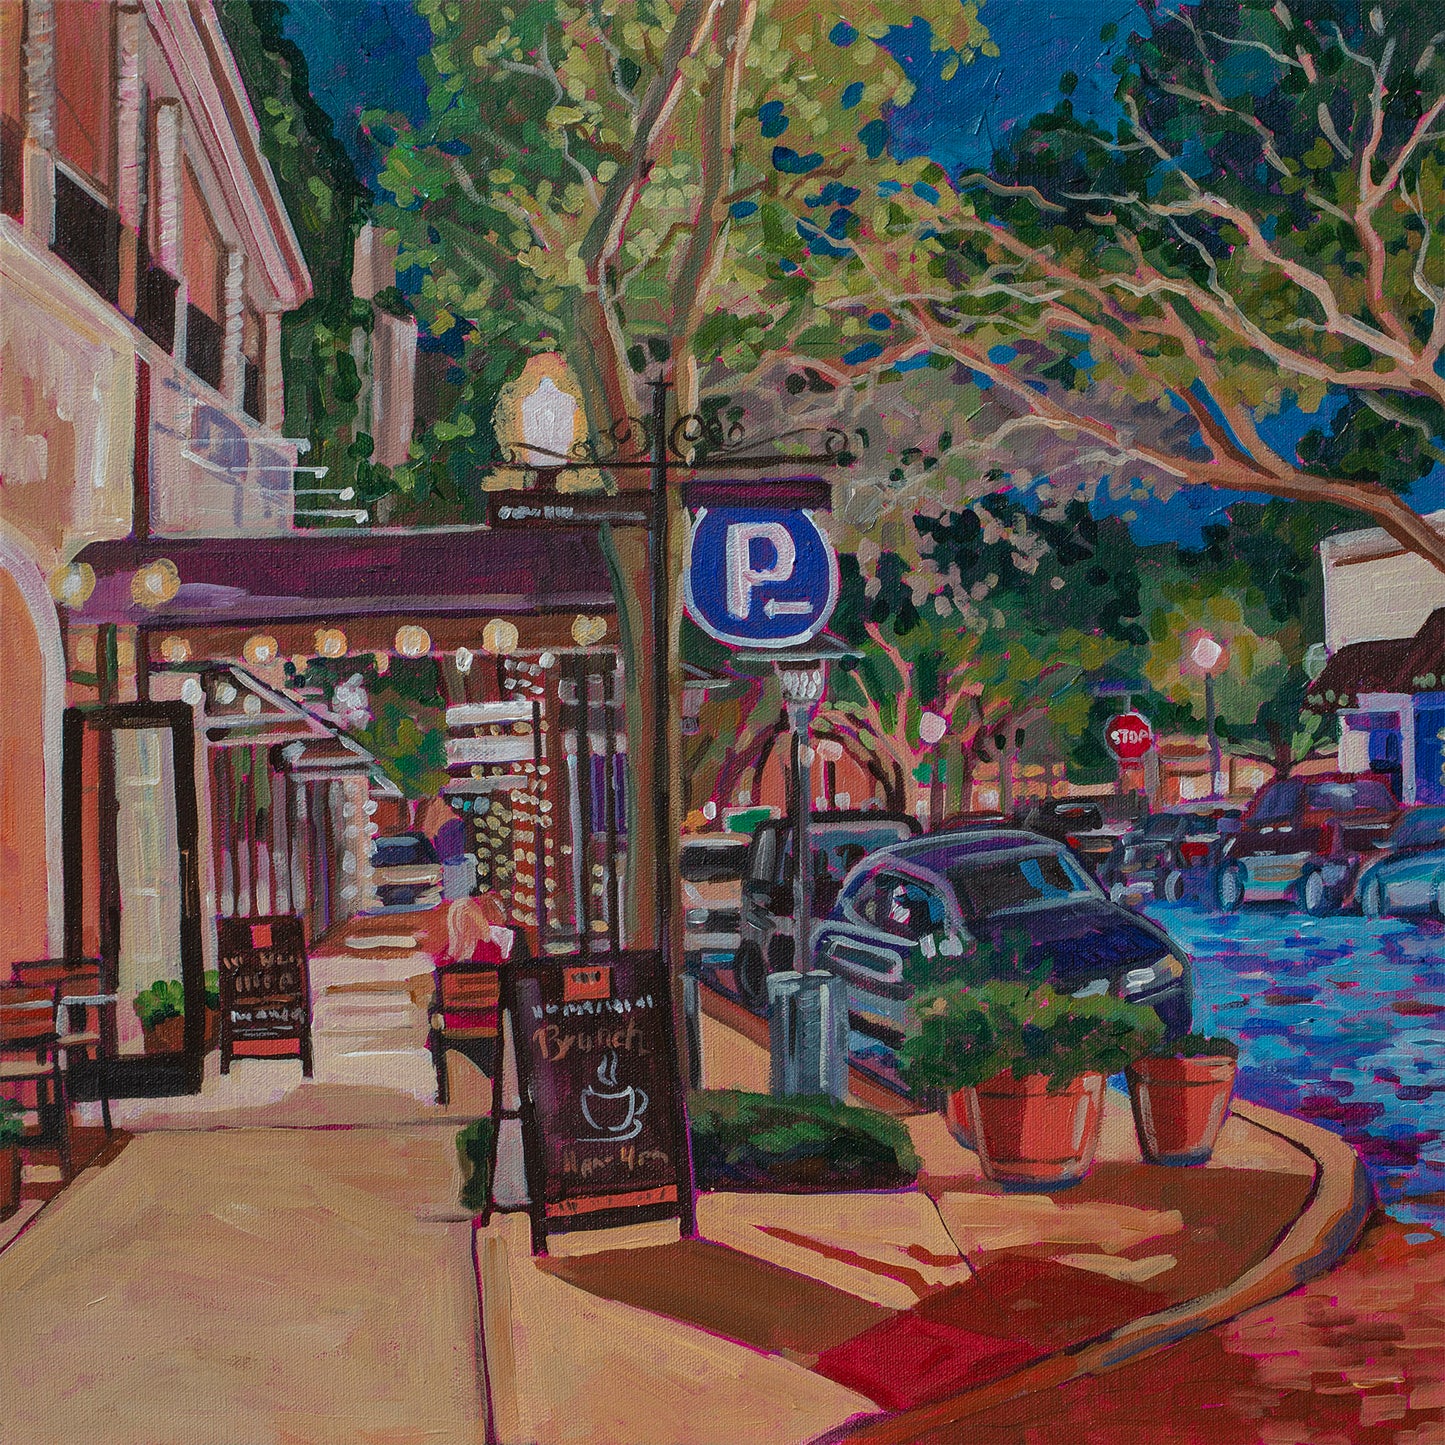 Winter Park Nightlife 6 painting 20x20 inches vibrant street scene with dramatic light on tree lined street at night